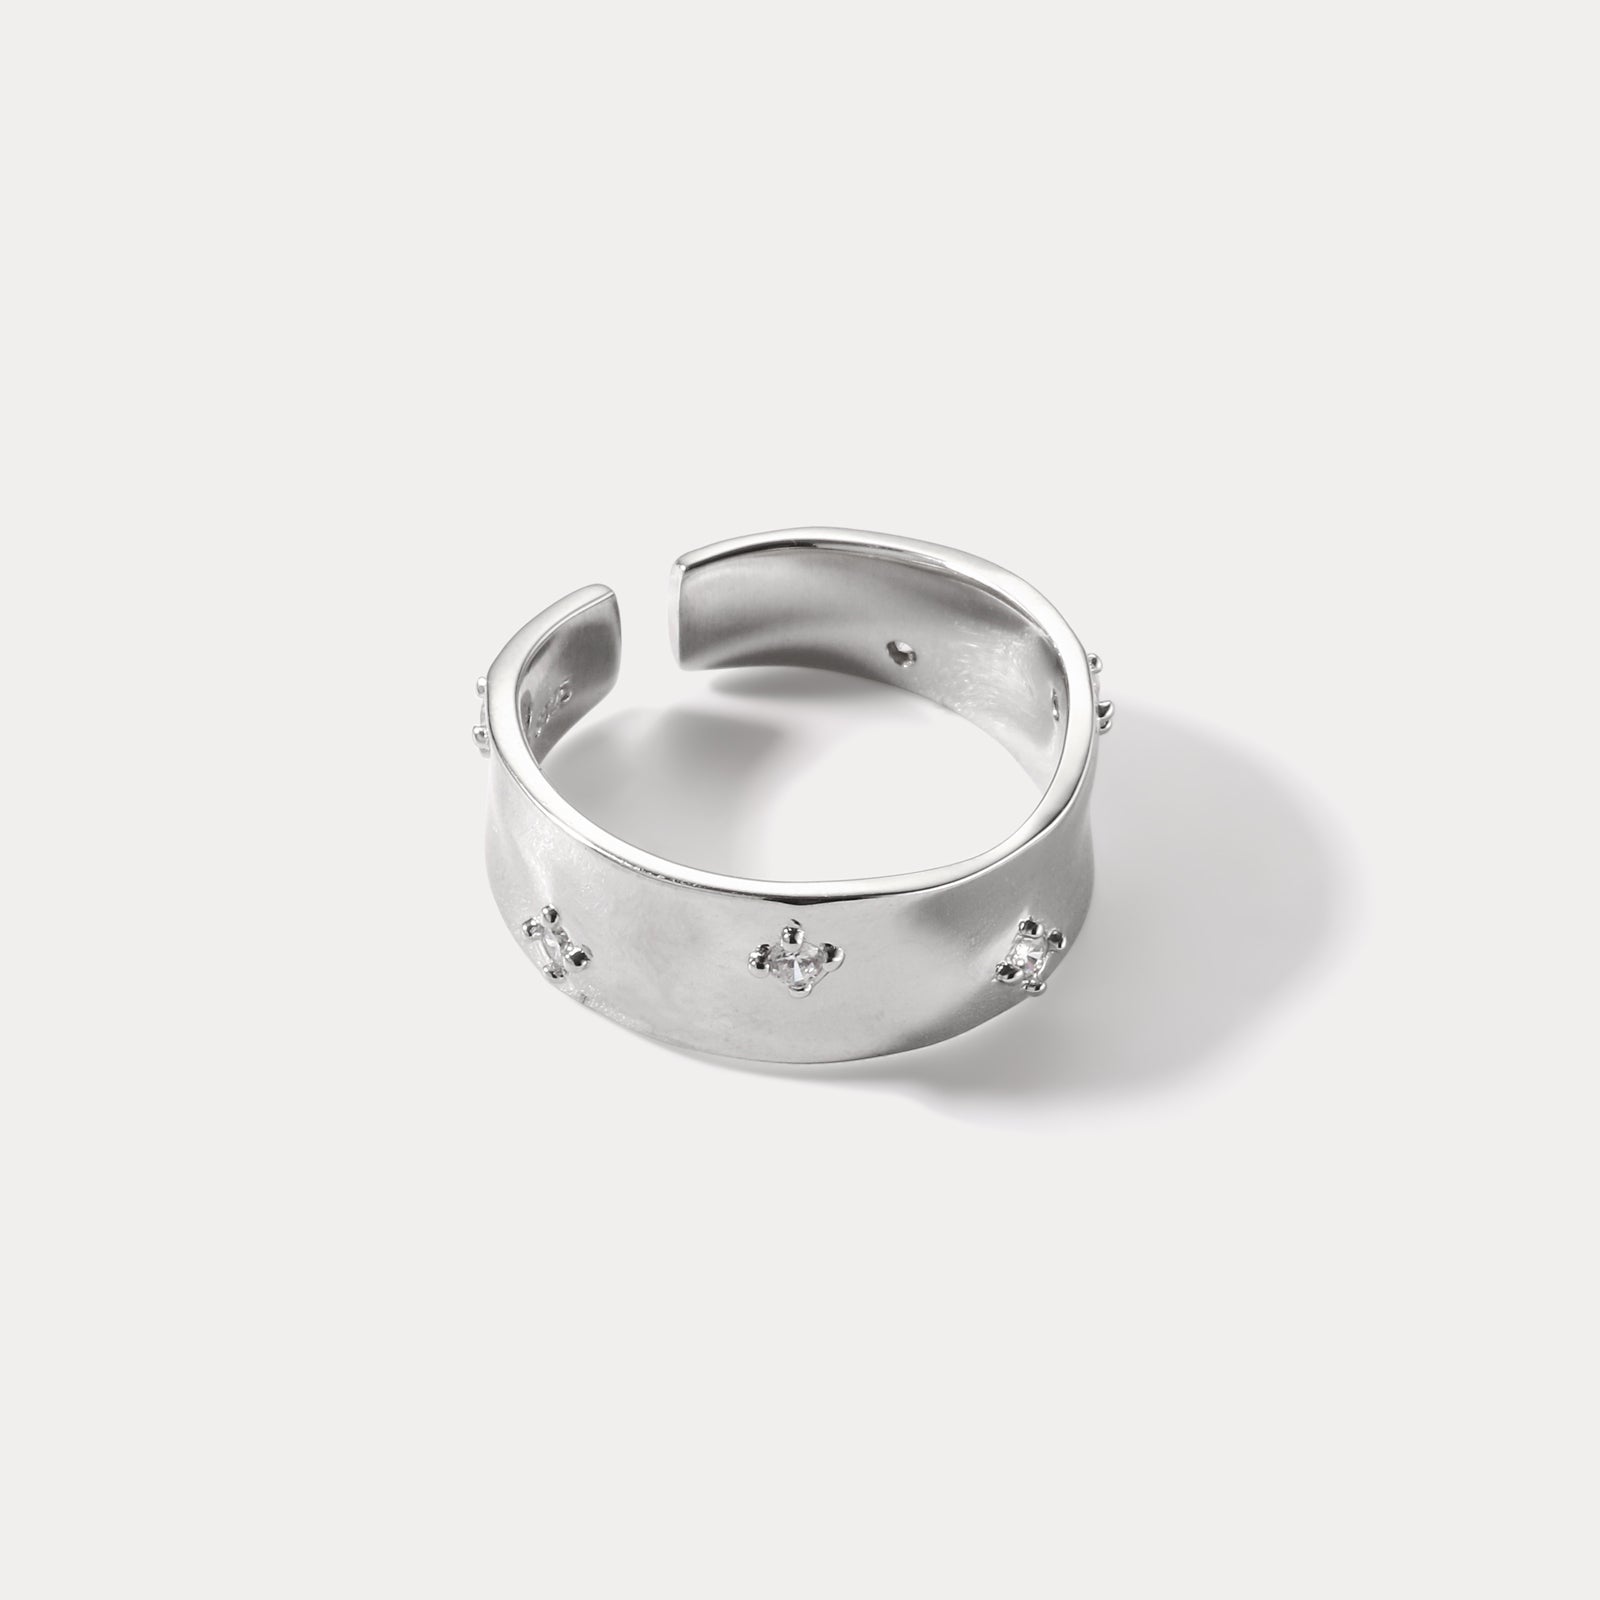 Silver Starry Dainty Ring